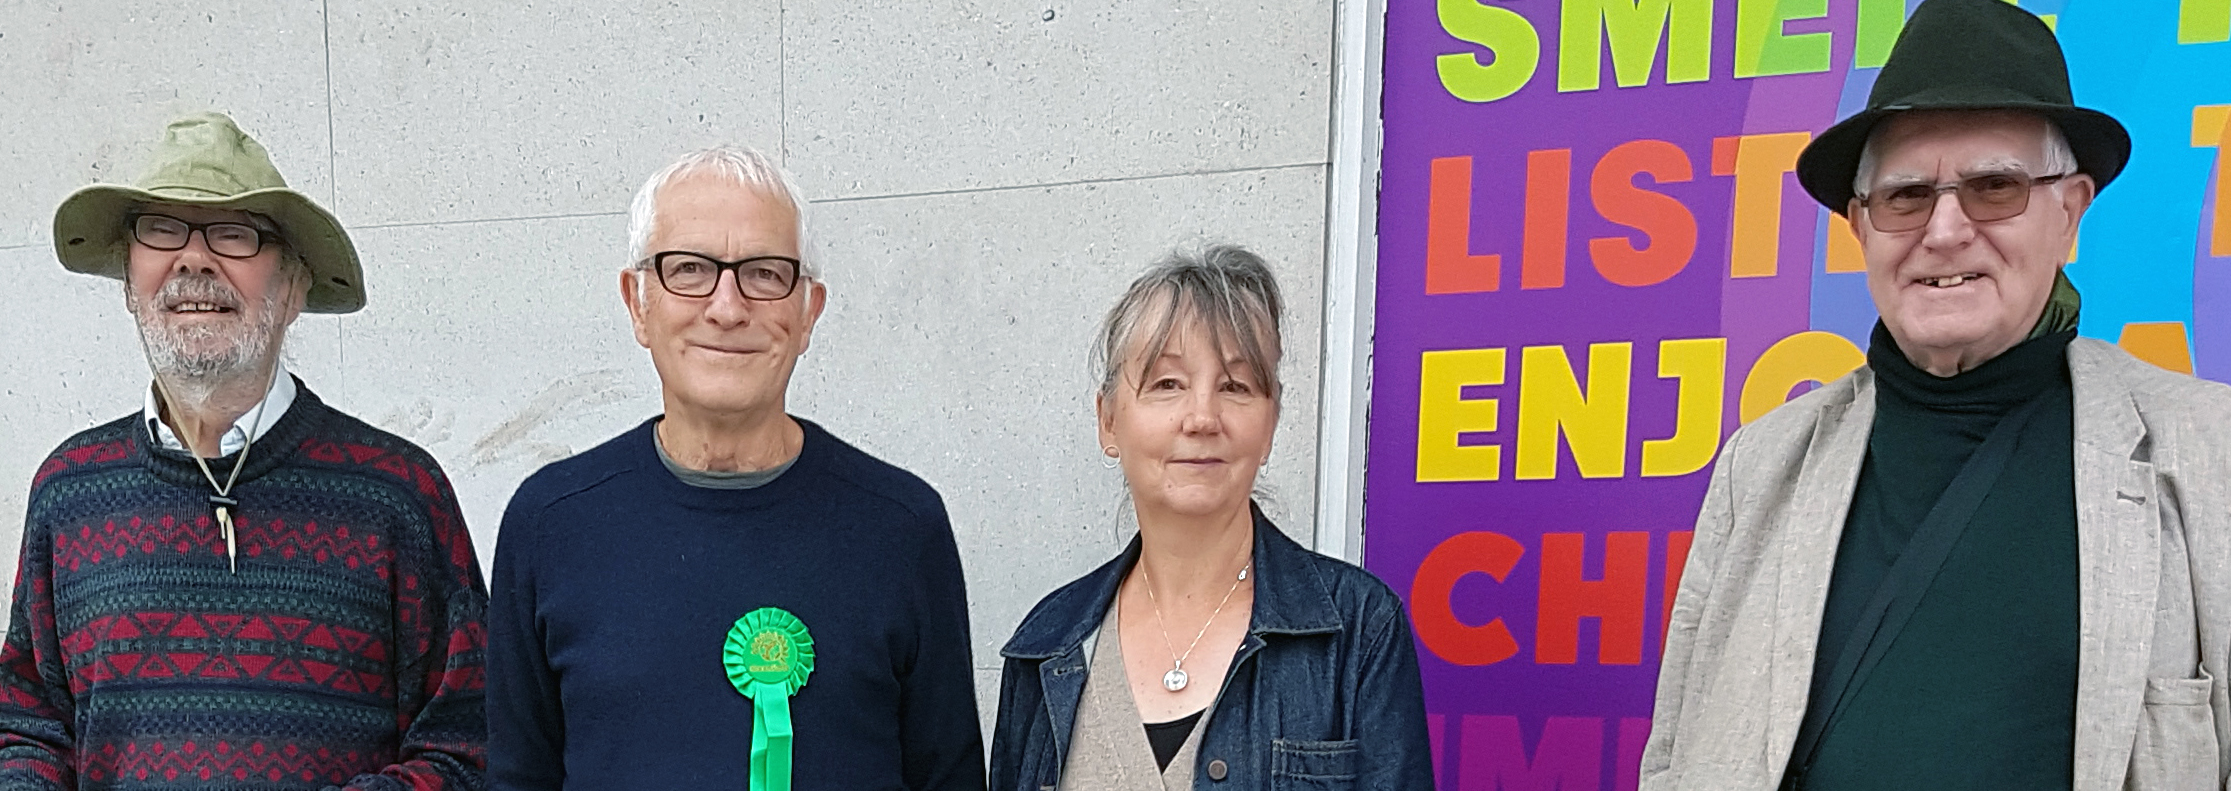 Green Party activists at the market stall